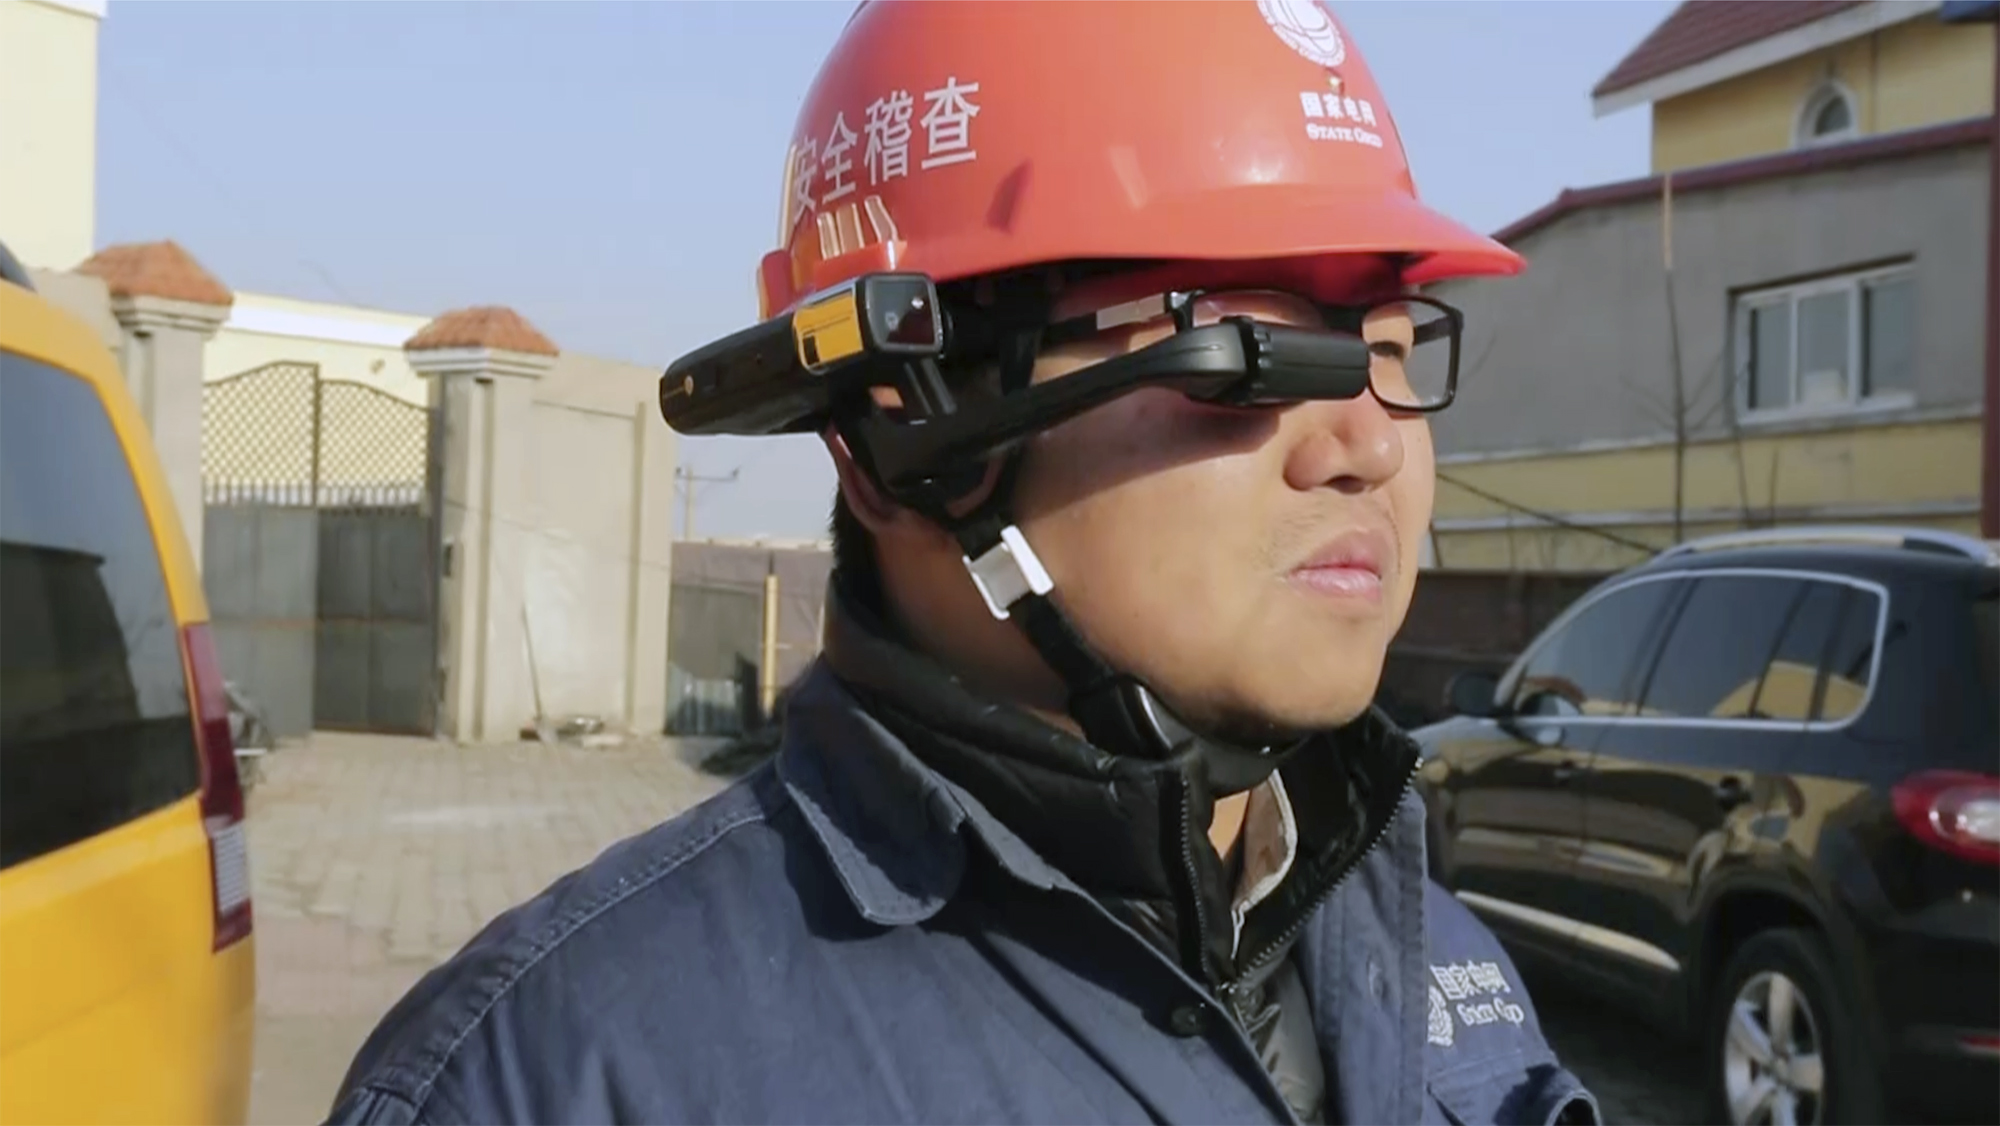 Workers for State Grid, China's state utility company, work in the field using RealWear's headset.(Contributed photo)